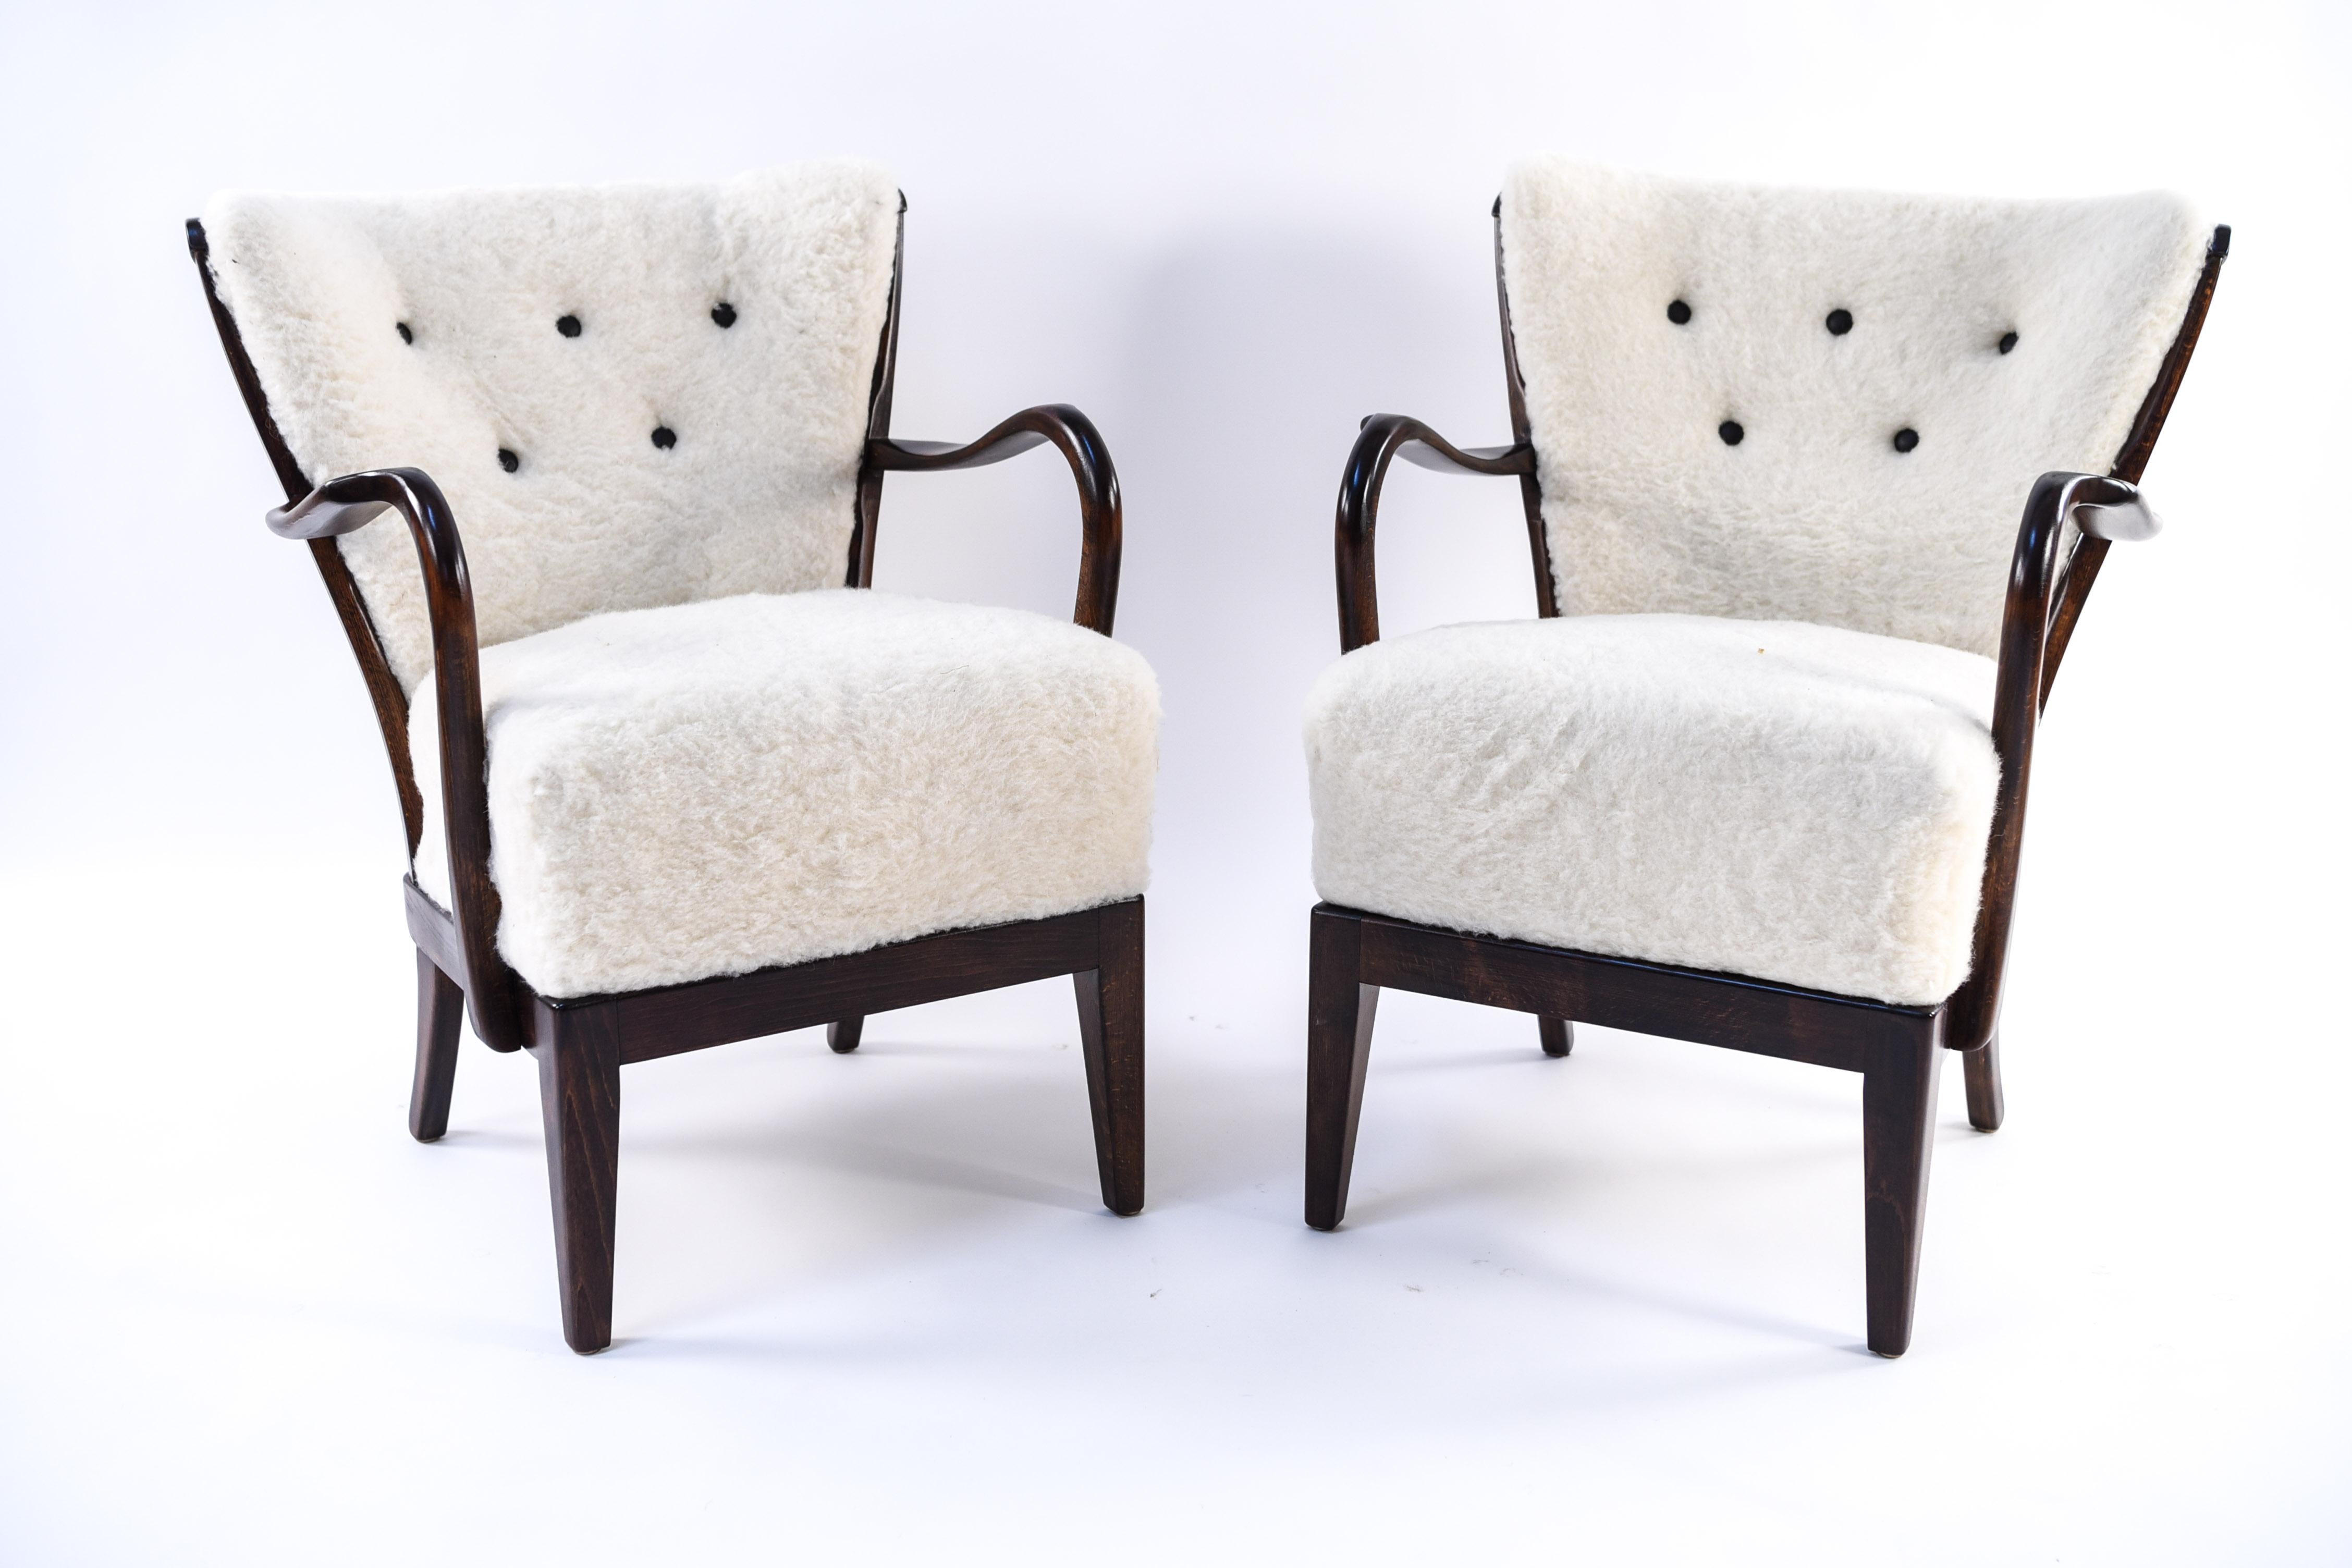 A pair of stunning model 177 lounge chairs by Slagelse. The beautiful lines of the chairs' design are accentuated by the lambs wool upholstery and button tufted back detail. A very attractive pair that epitomize the ingenuity of Danish midcentury